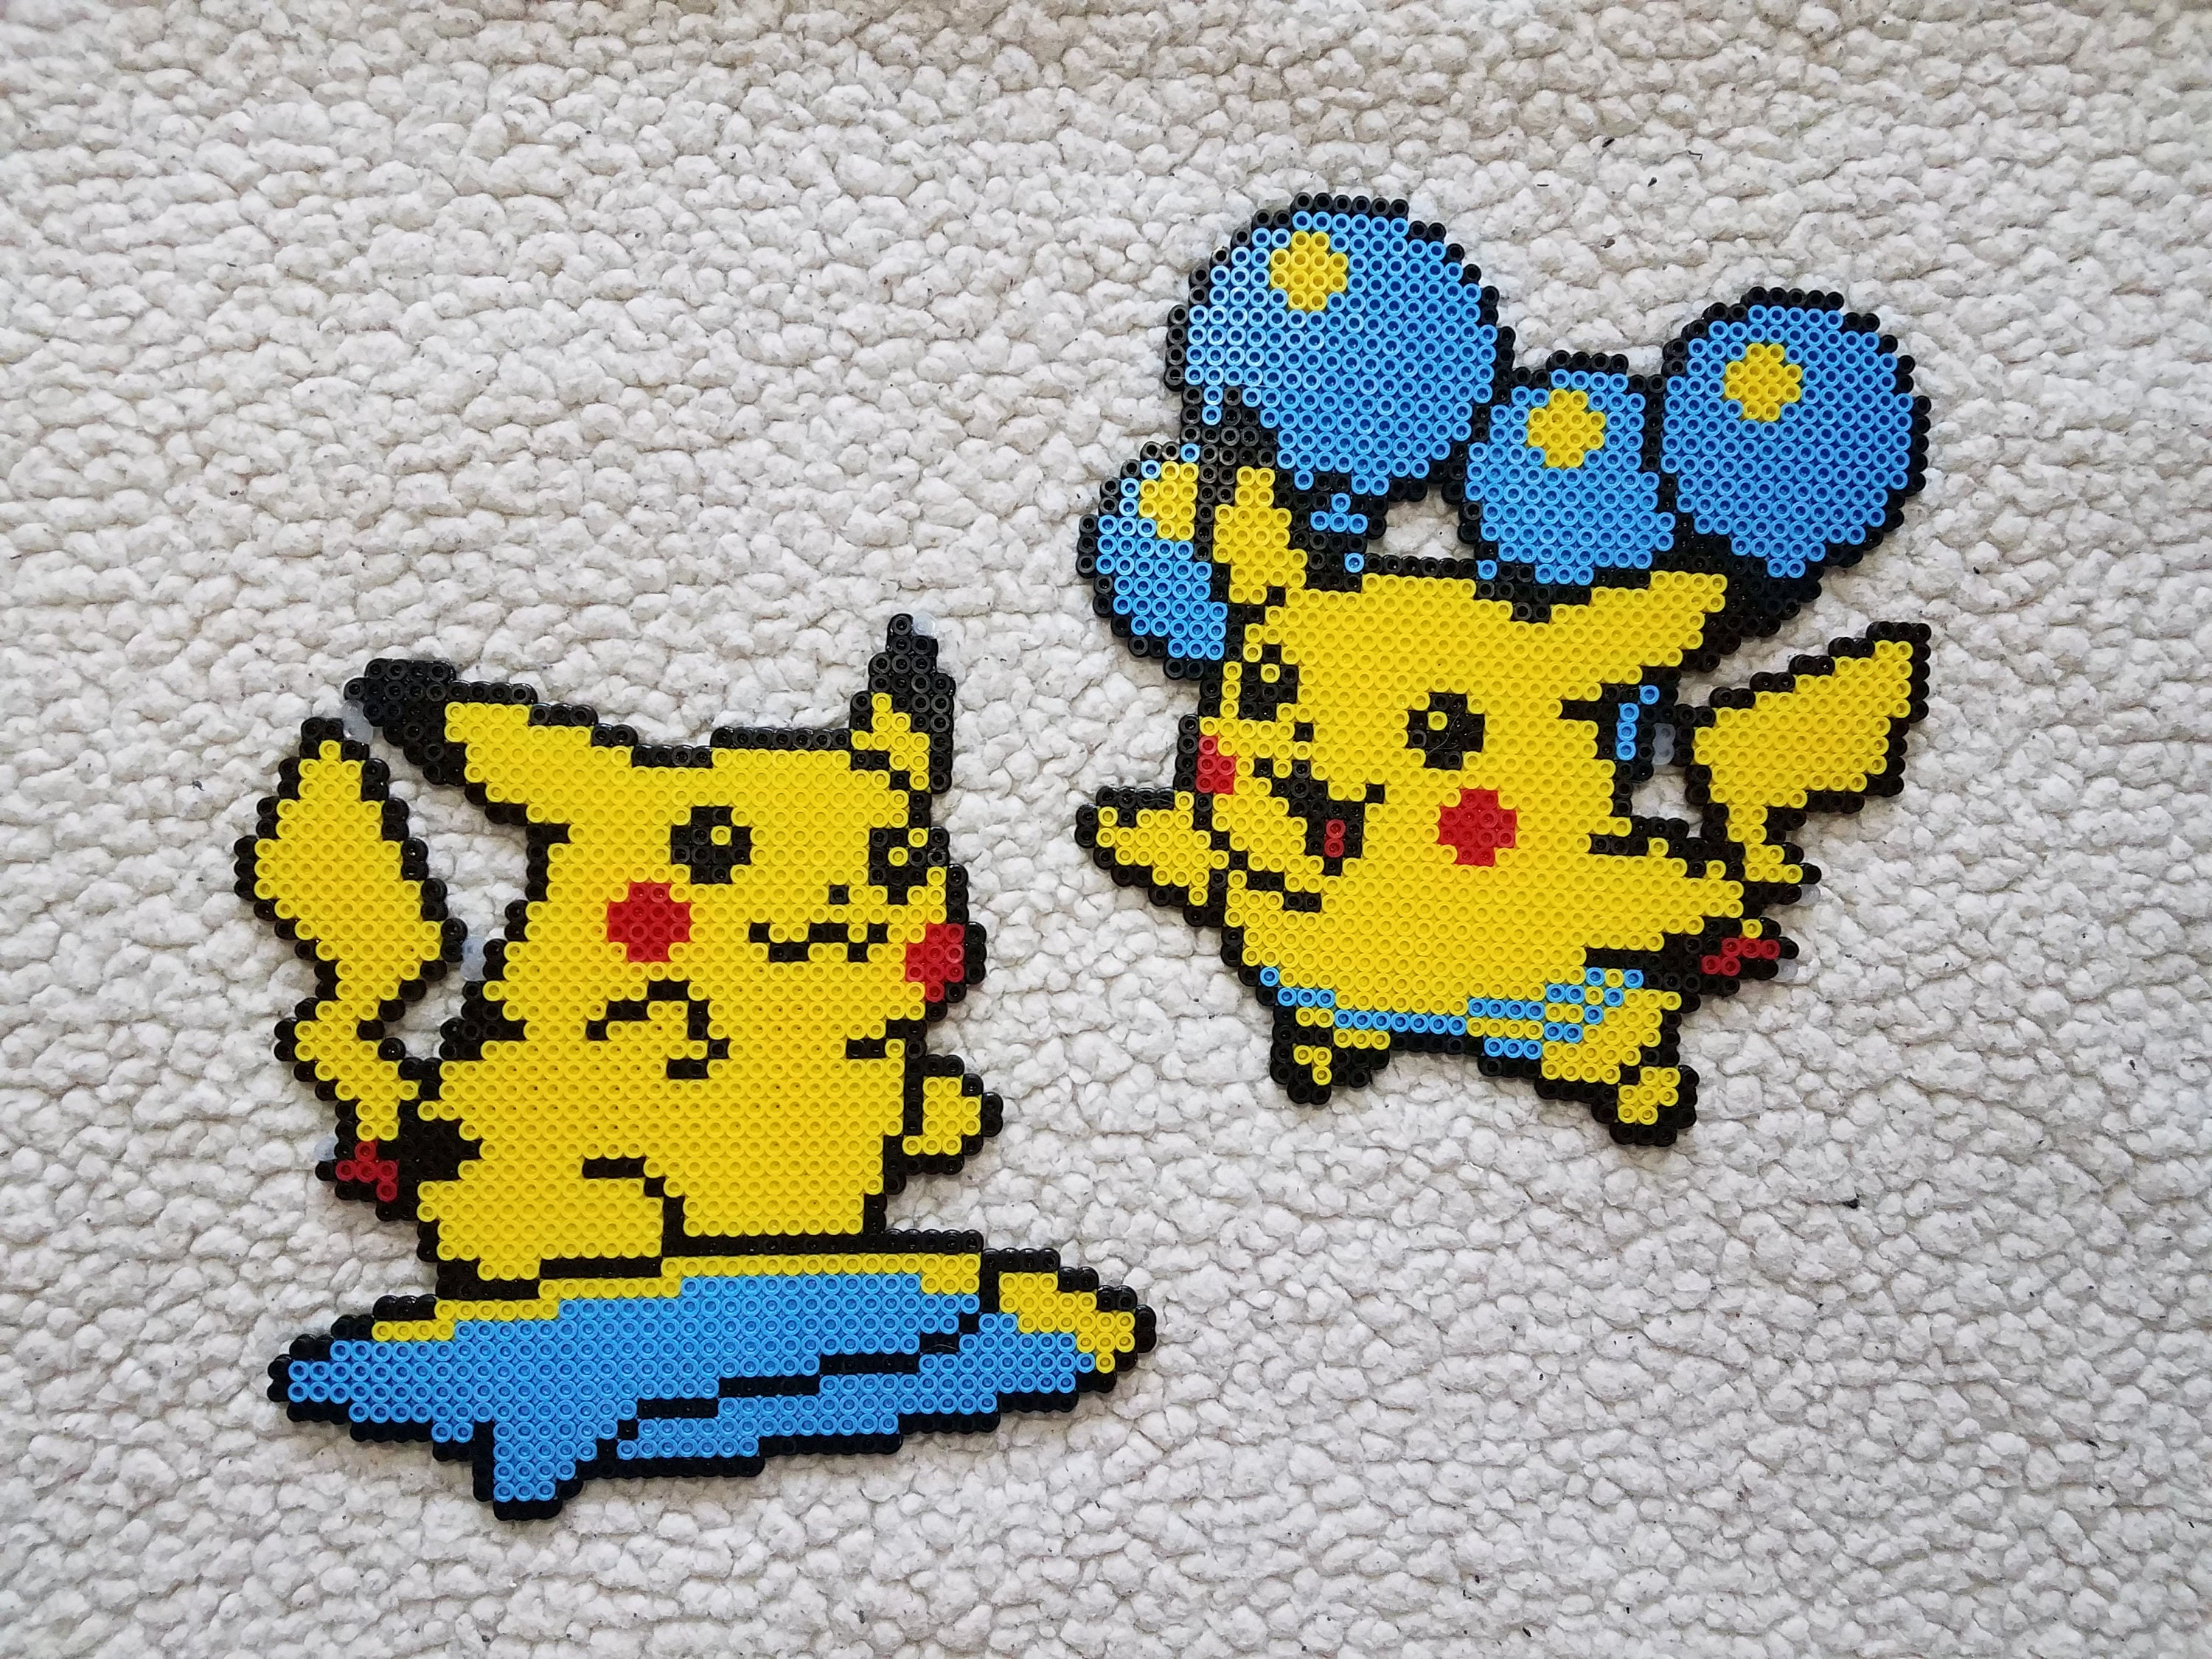 Special sprite for Surfing Pikachu (Pokémon Yellow, Gold/Silver